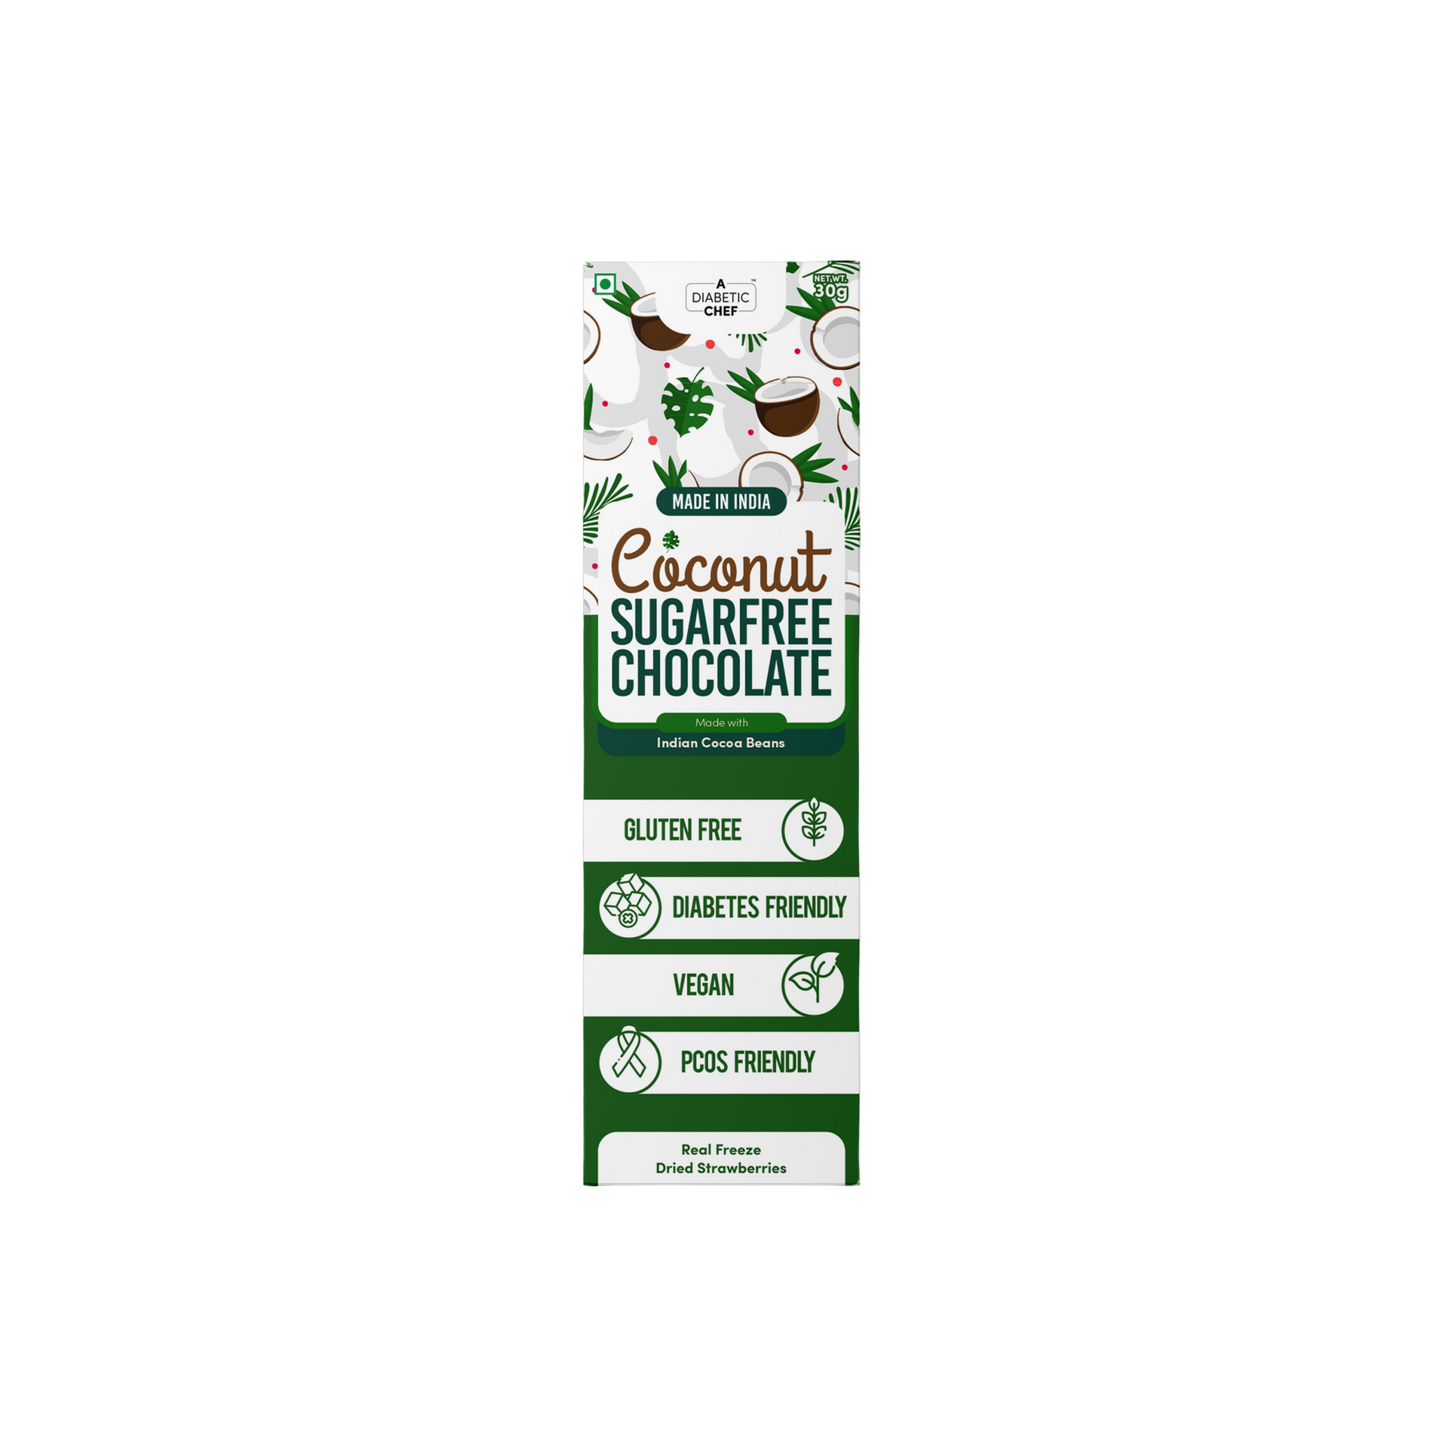 Coconut SugarFree Chocolate (Pack of 3) | A Diabetic Chef | Vegan, 30g